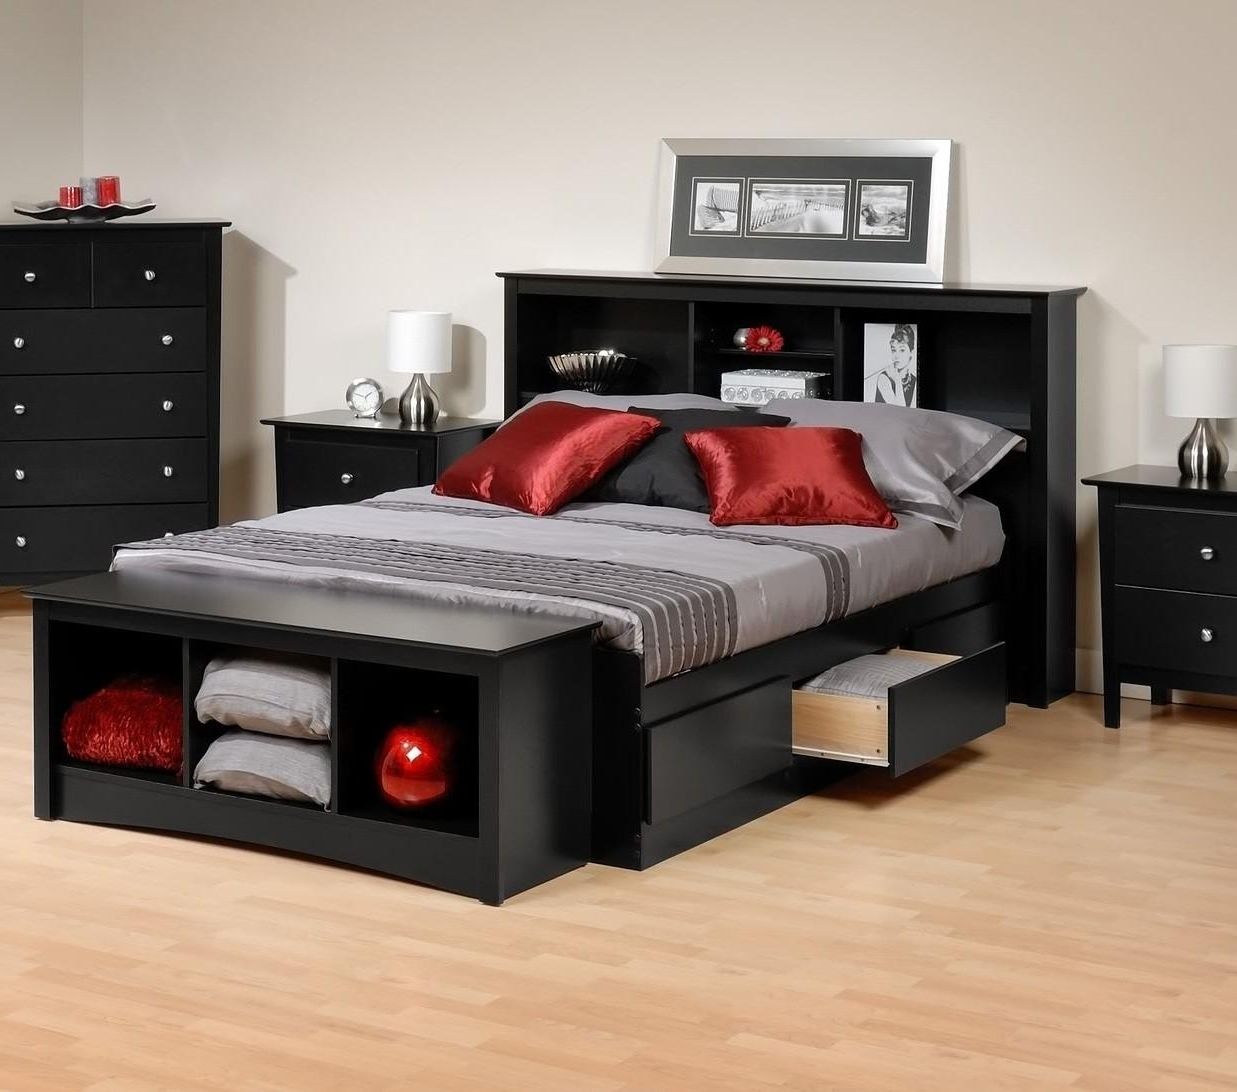 Platform Storage Bed W/ Bookcase Headboard Bed Size:full,color Within 2018 Full Size Storage Bed With Bookcases Headboard (View 14 of 15)